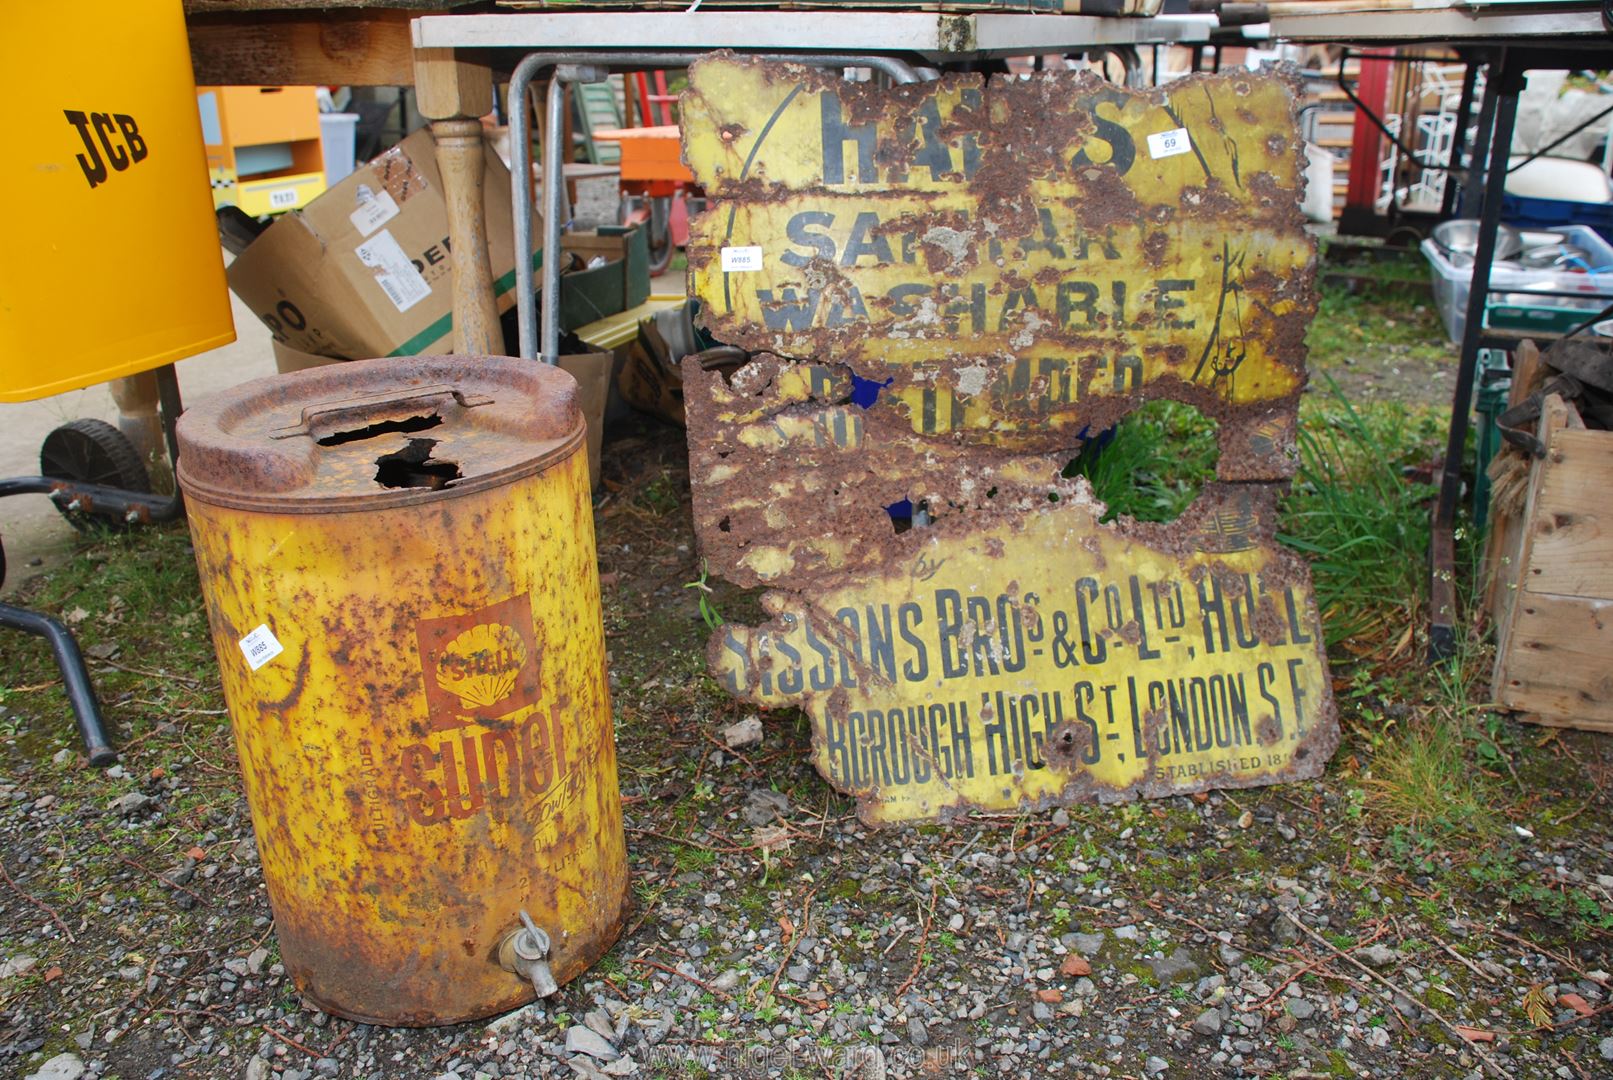 An old Shell Oil can with tap dispenser and a Halls metal advertising sign a/f.